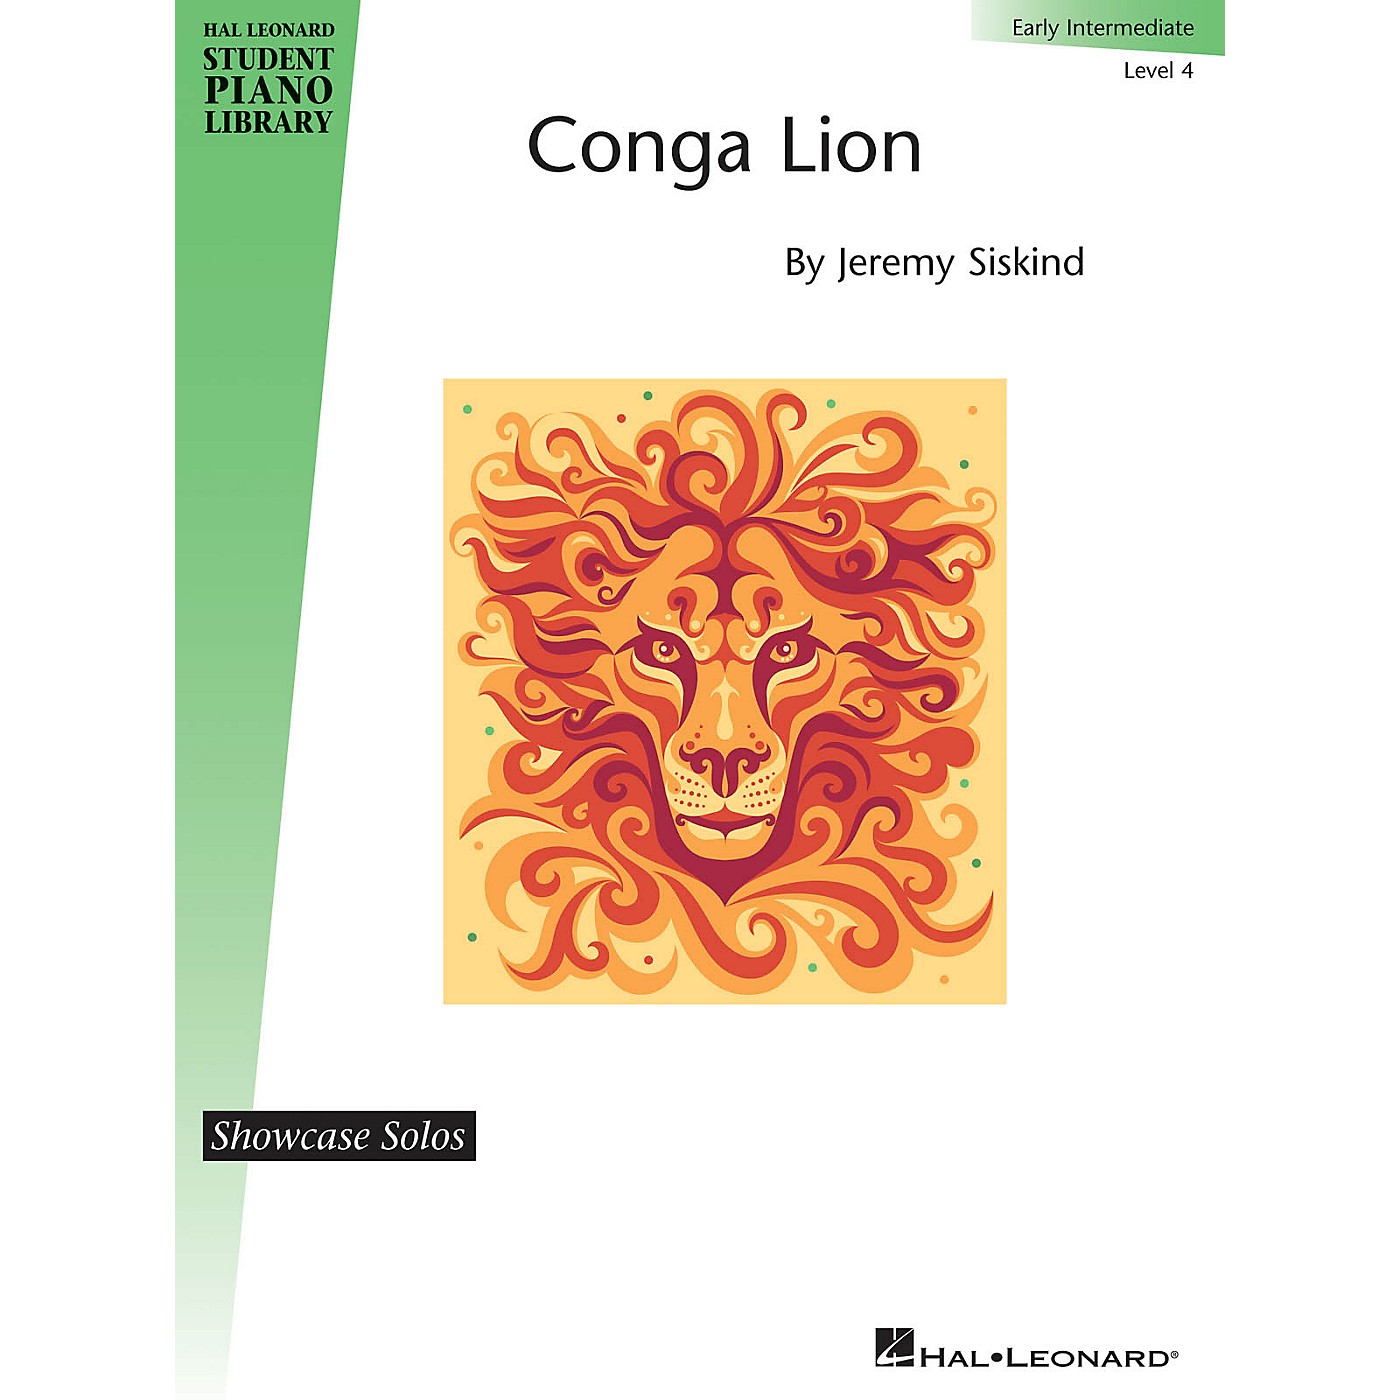 Hal Leonard Conga Lion Piano Library Series by Jeremy Siskind (Level Early Inter) thumbnail